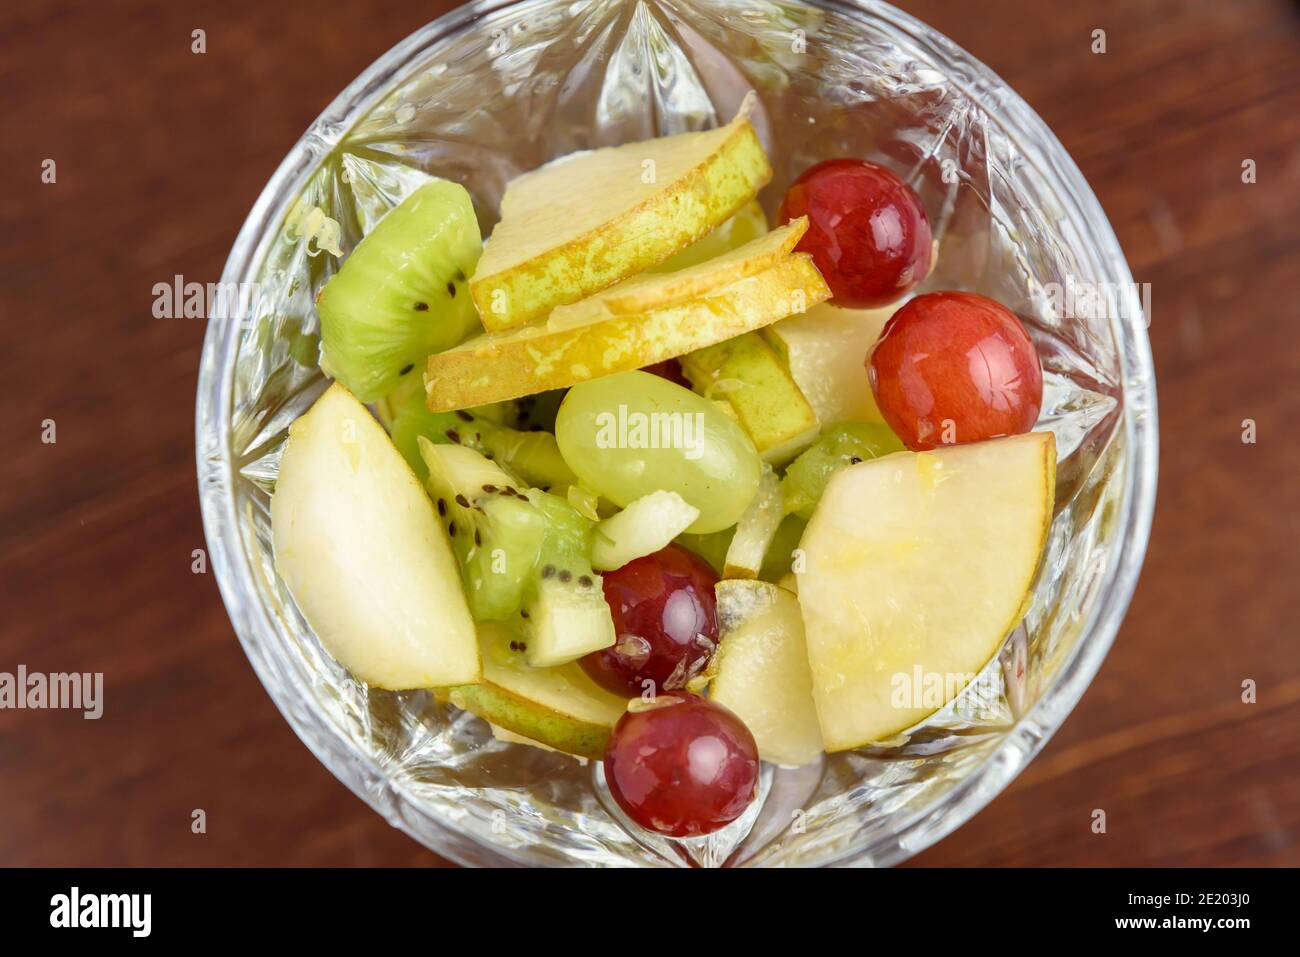 Fruit salad with tropical fruits, top view, close-up Stock Photo